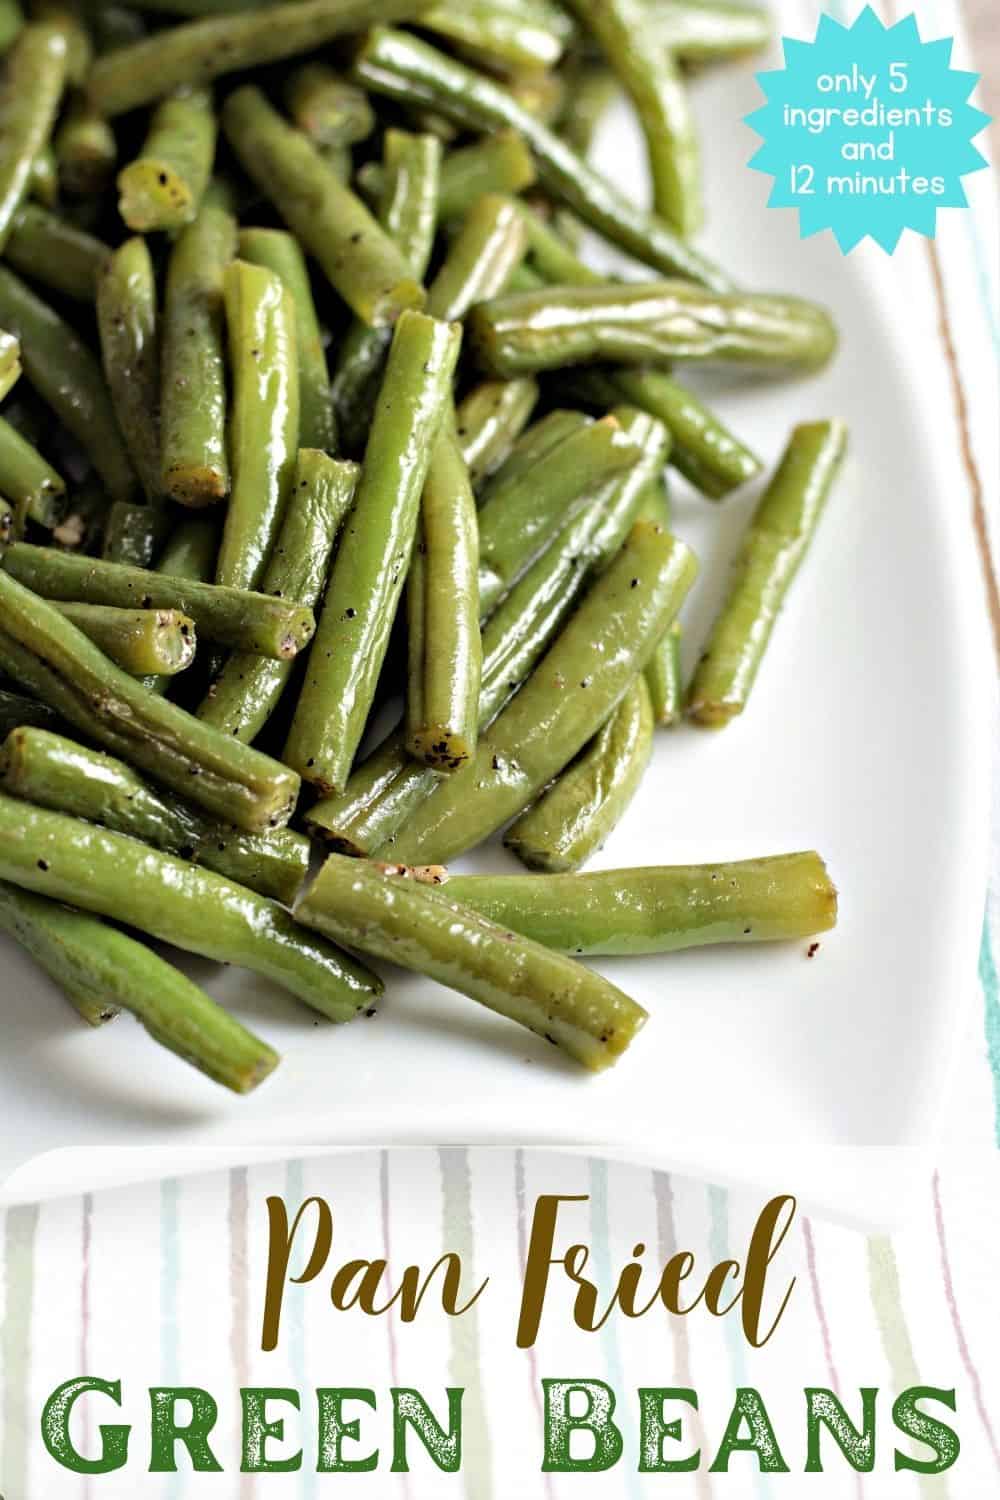 Close up view of green beans on a white plate with title text below it.